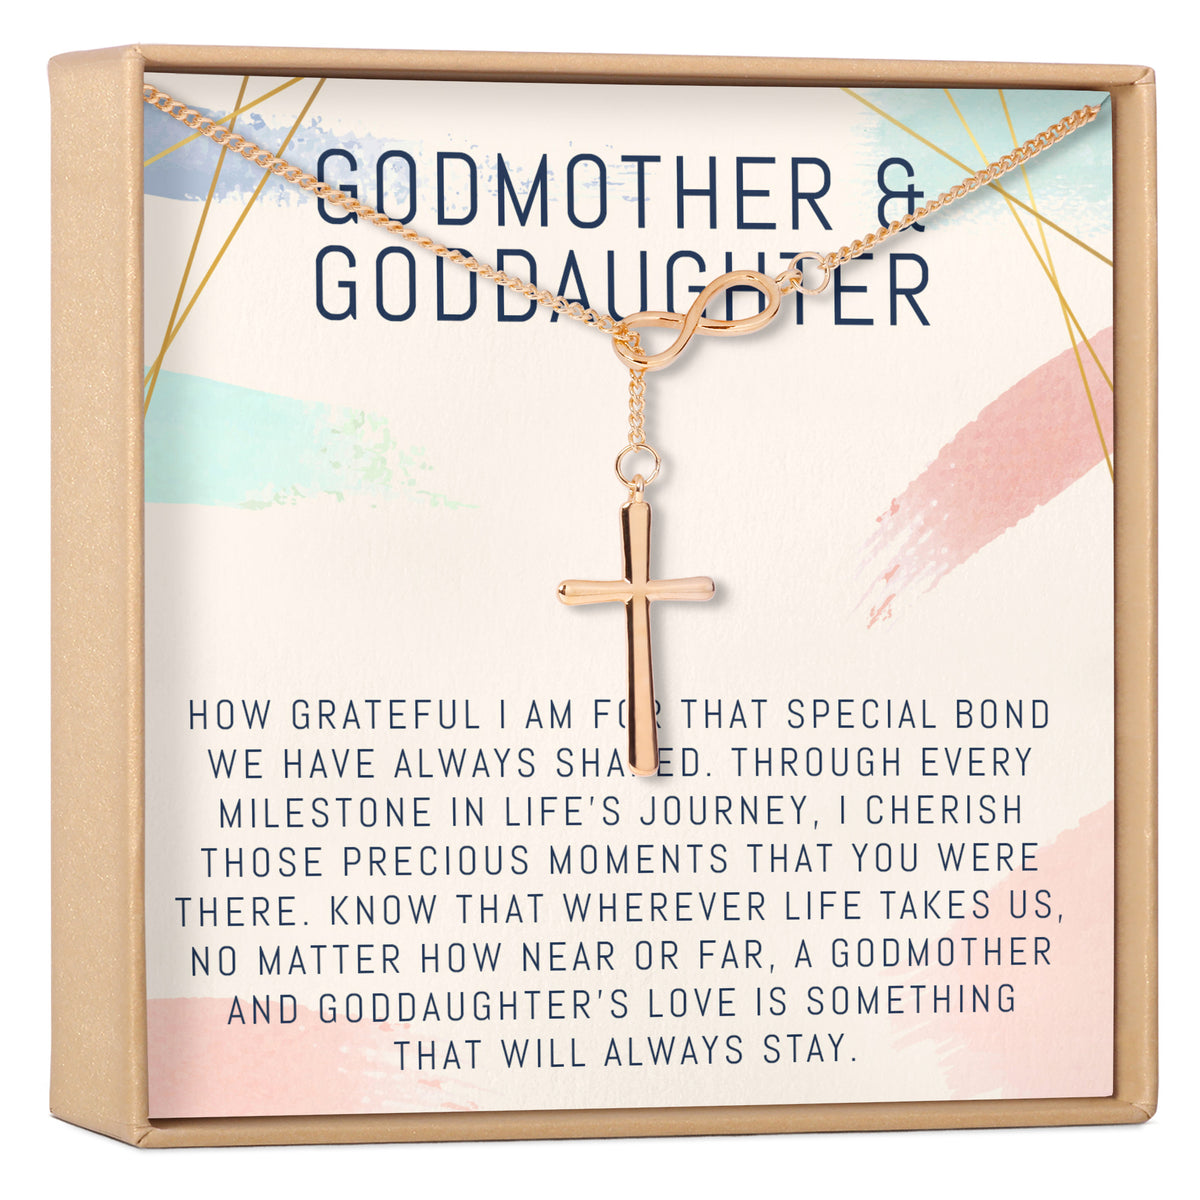 Godmother-Goddaughter Necklace, Multiple Styles Jewelry